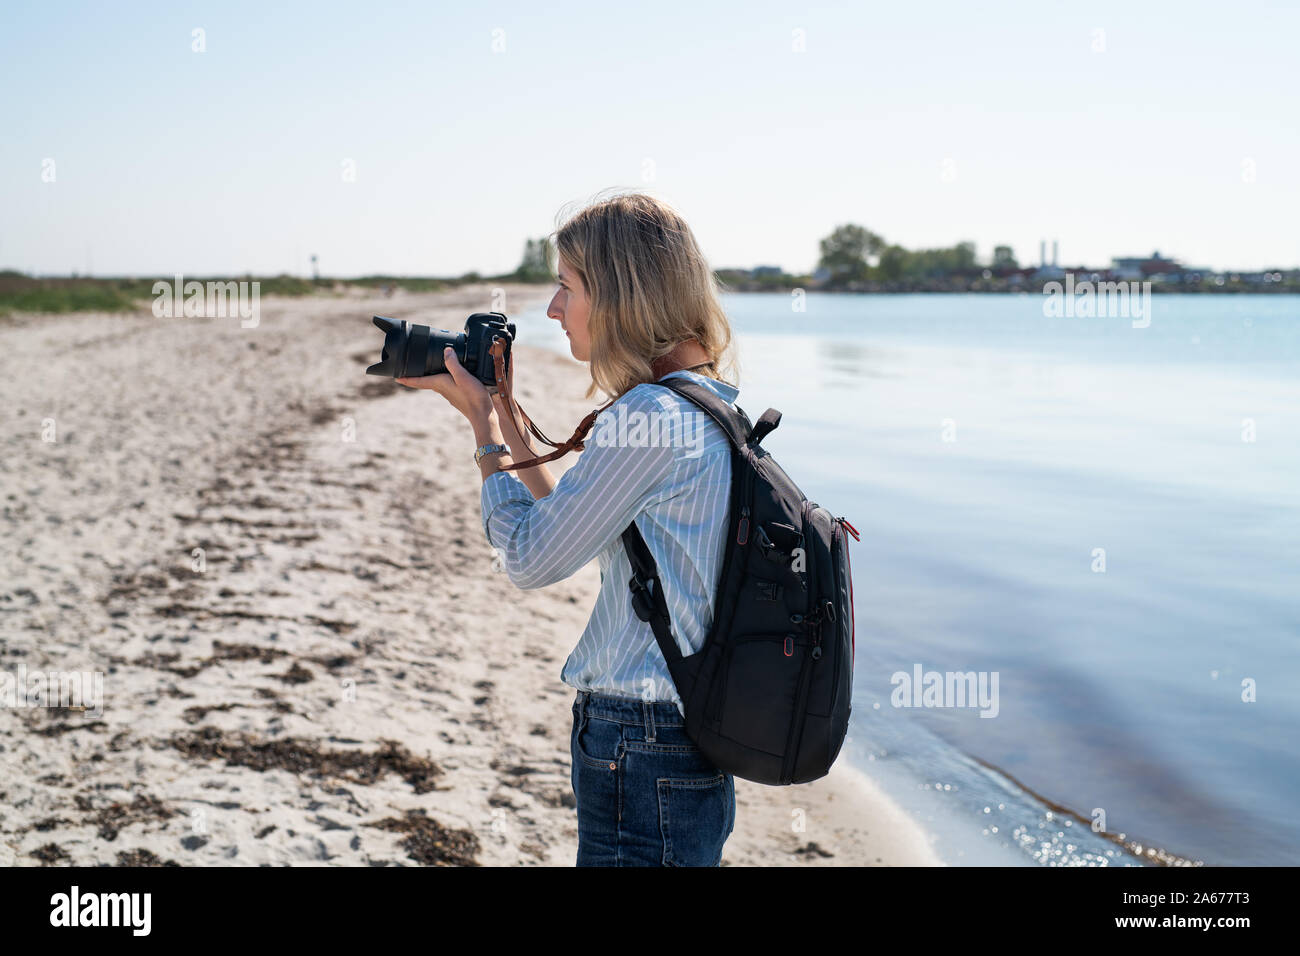 Woman photographing from a beach Stock Photo